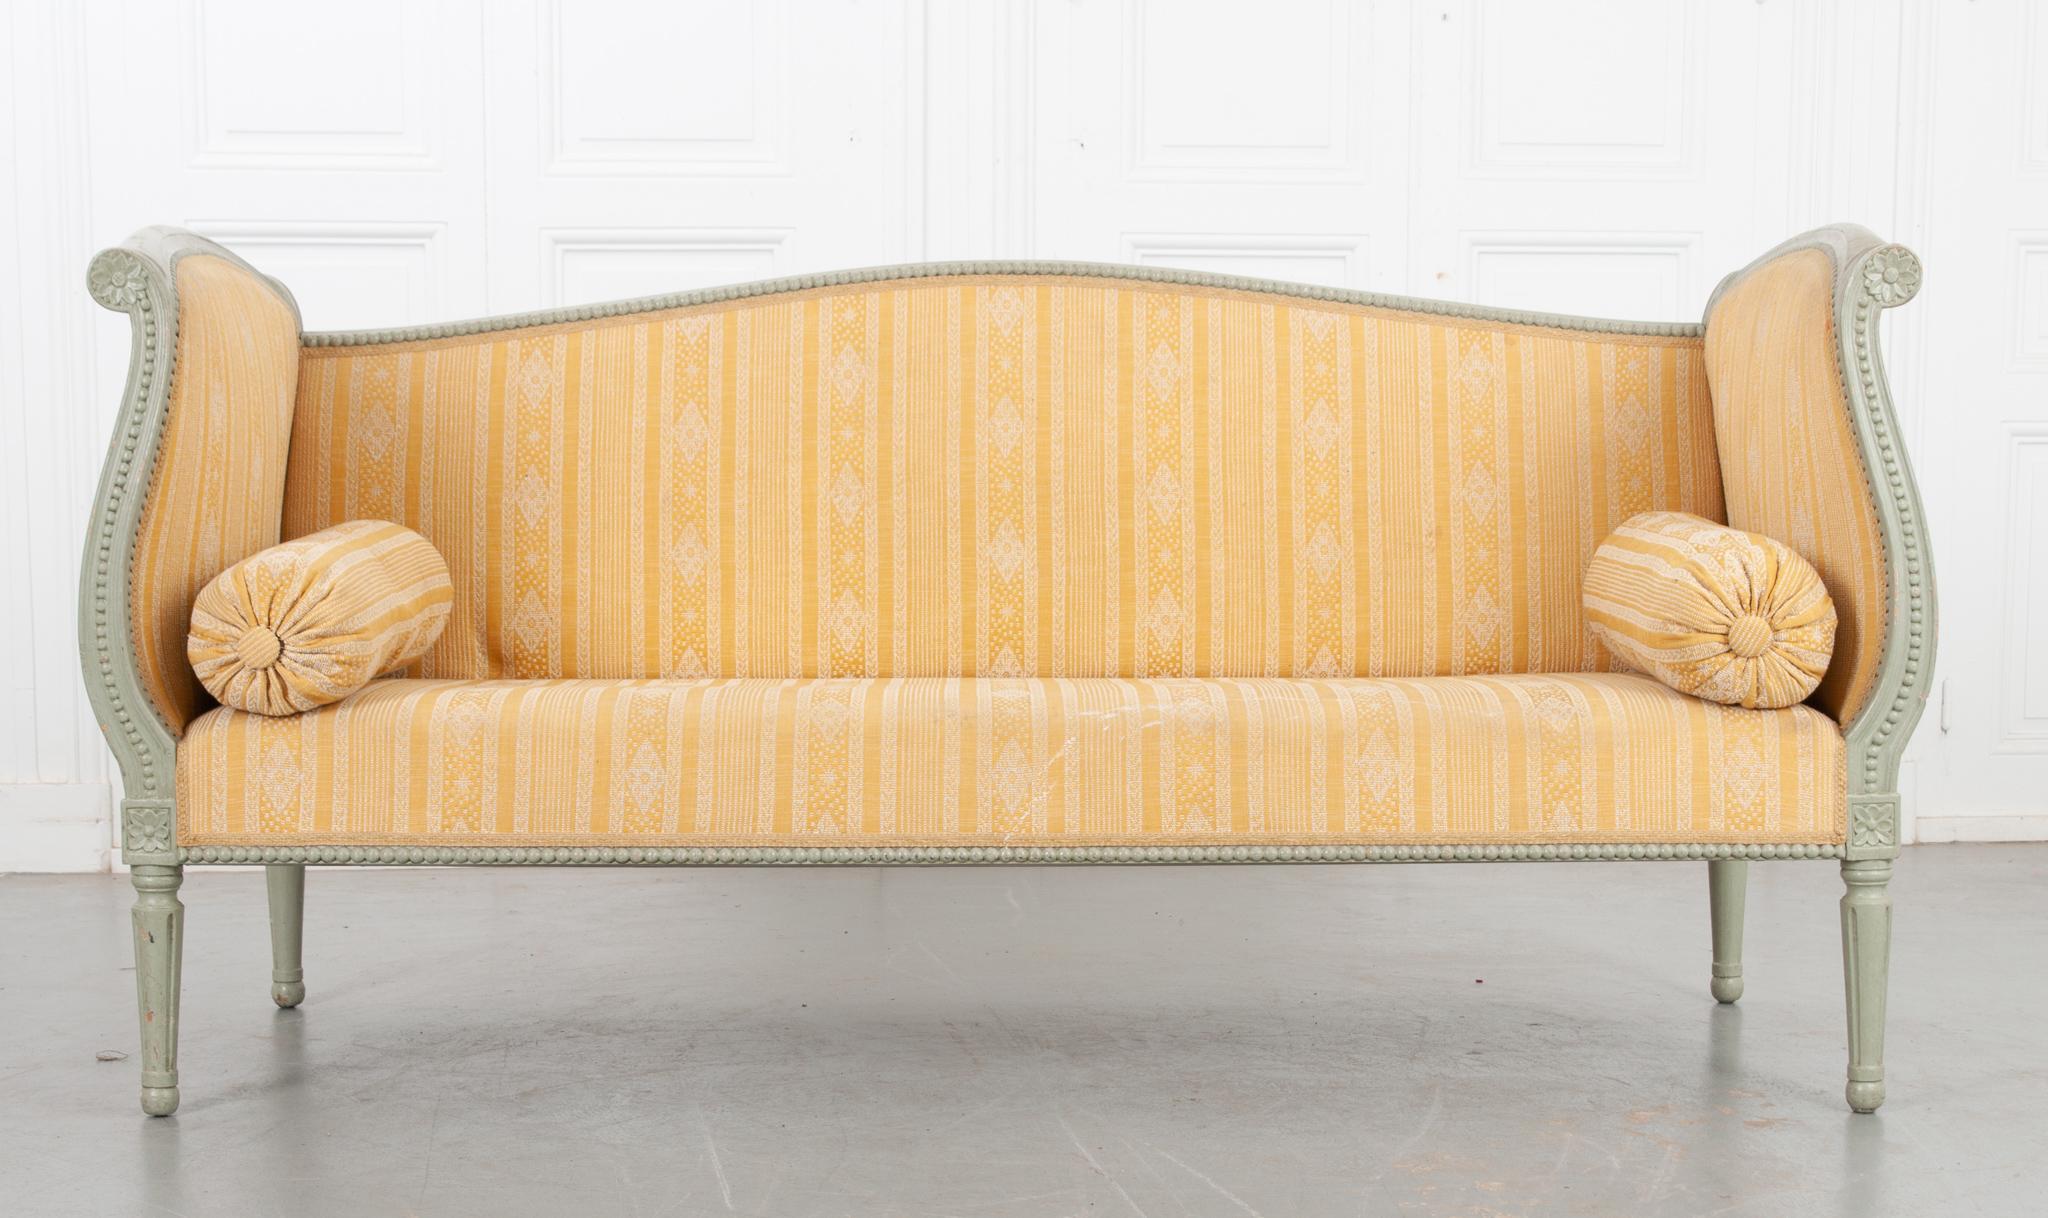 A vibrant upholstered Louis XVI style settee from Sweden, circa 1840. The green-ish blue paint is original to the frame, worn in few spots adding to the overall antique charm. The high back and shaped sides are covered with yellow and white striped